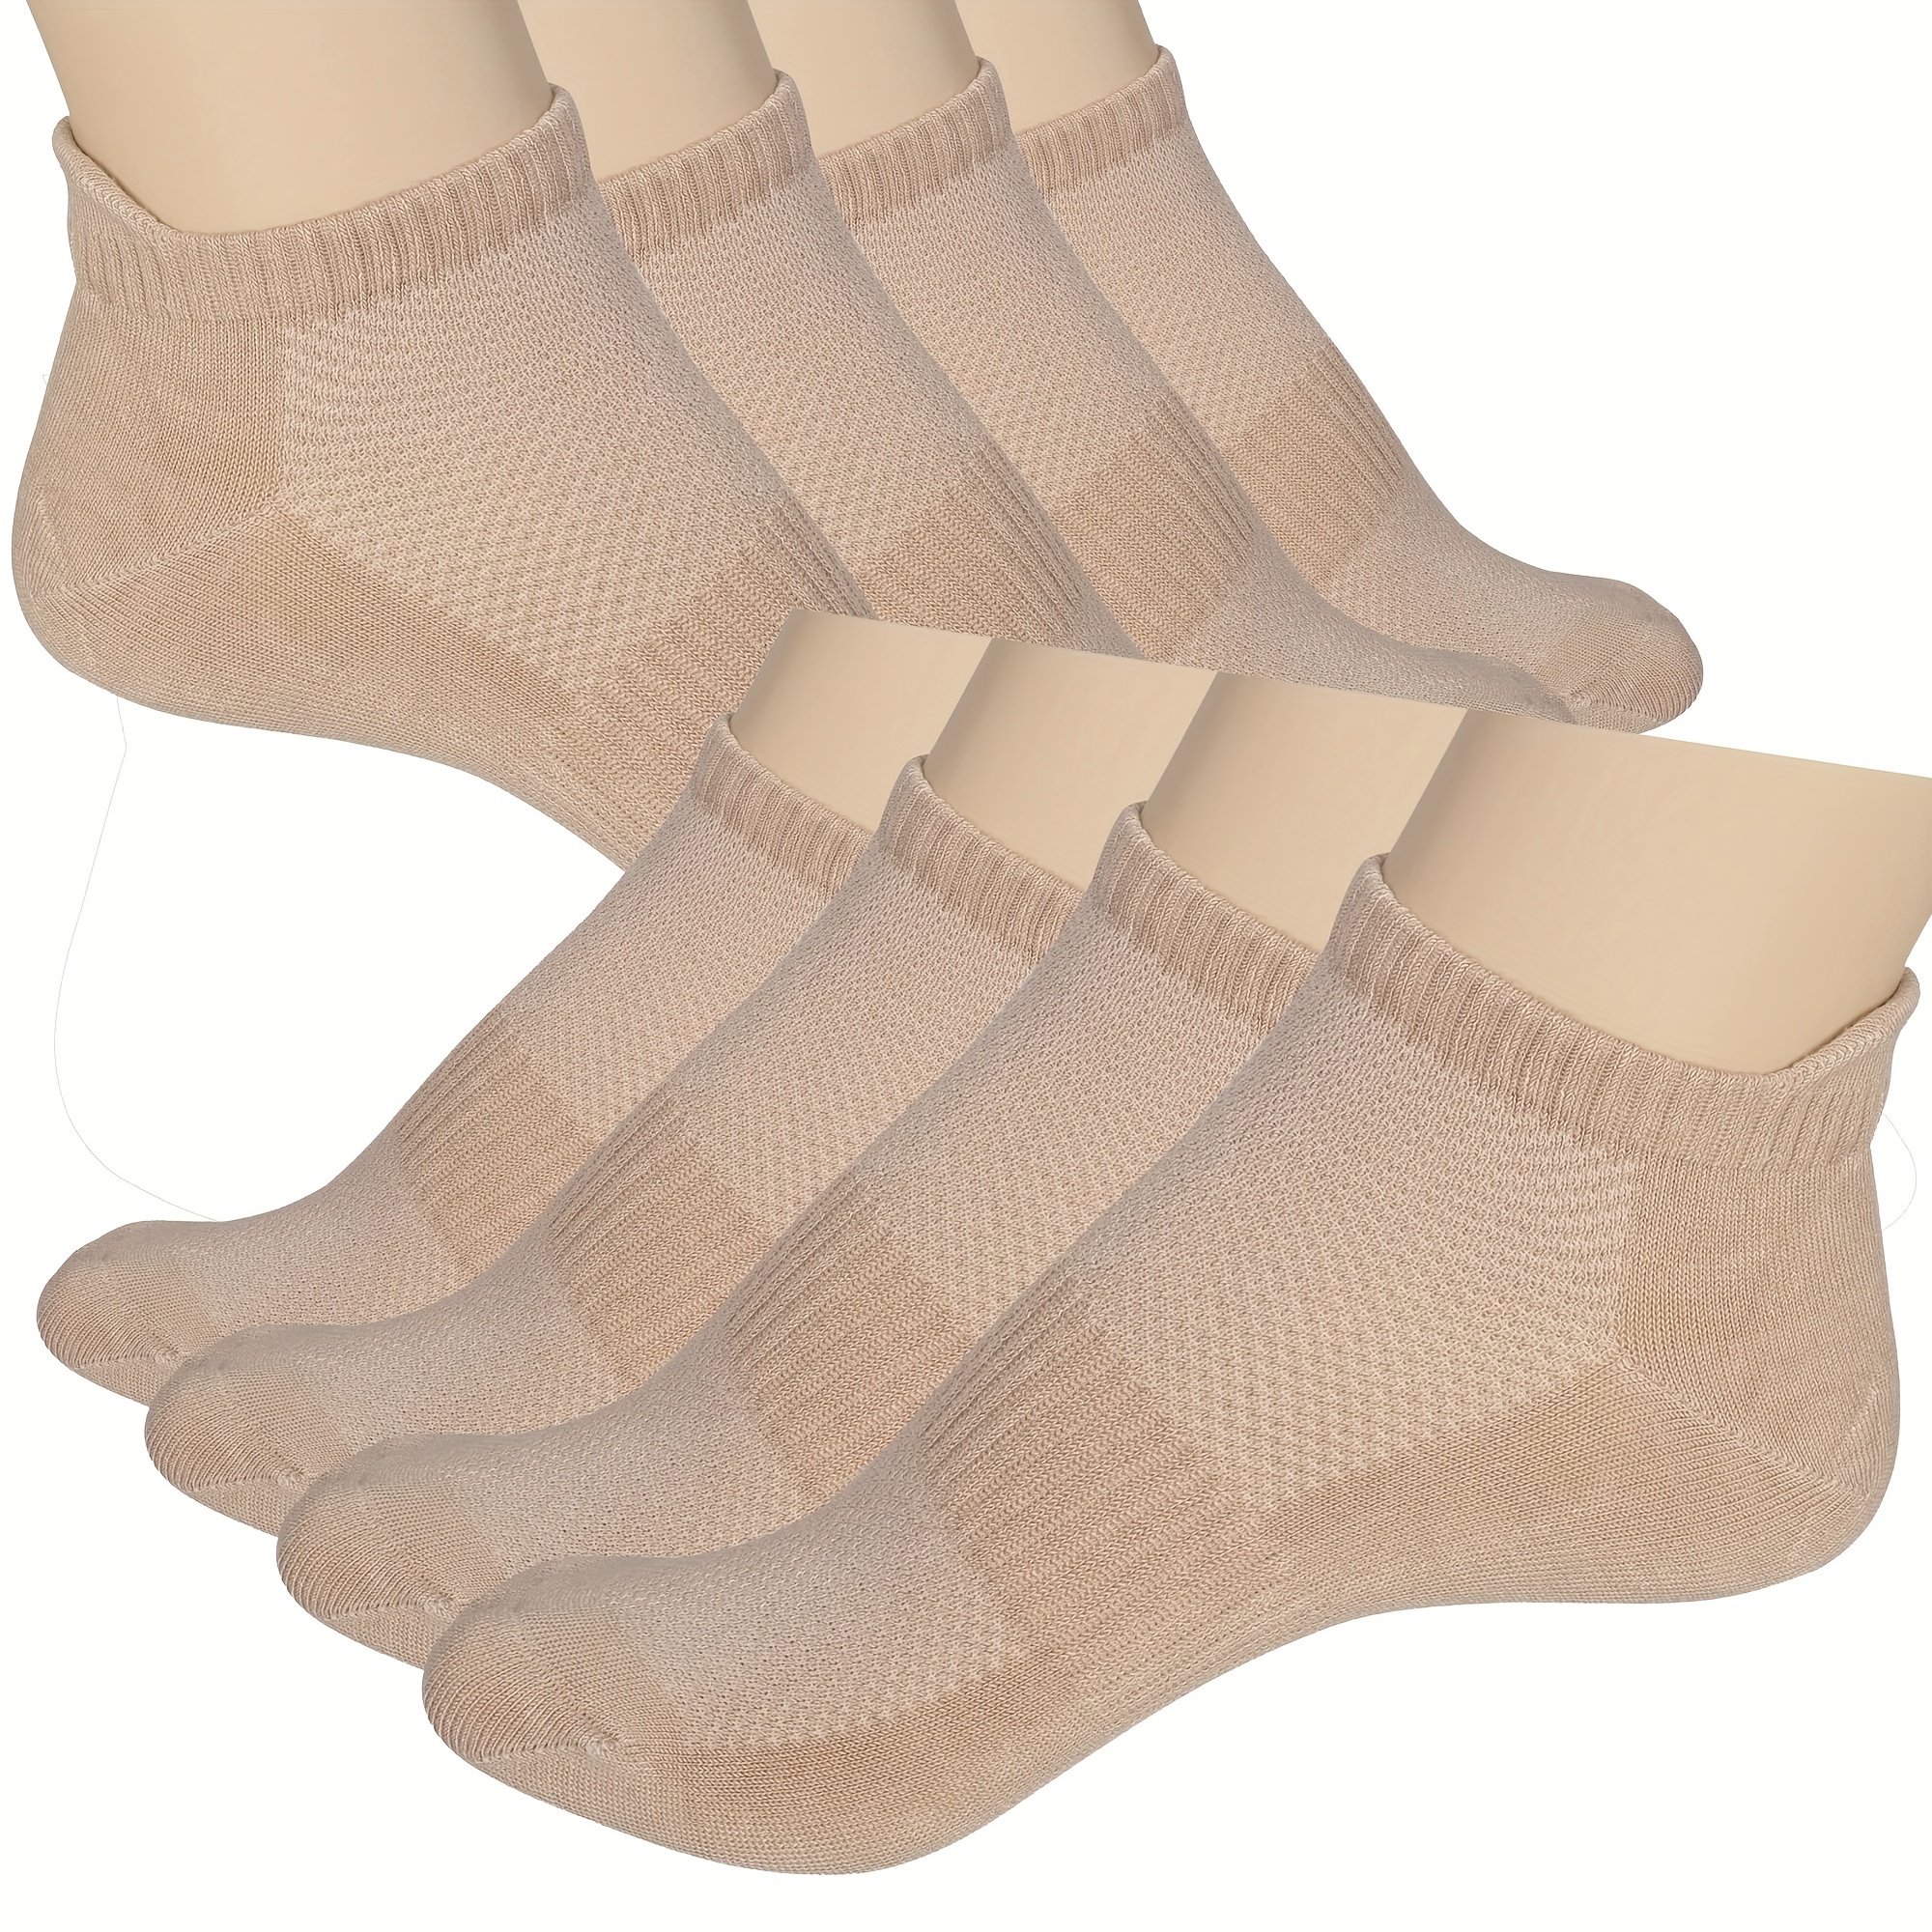 

8 Pairs Ankle Socks, Thin Sports Socks For Running, No-show Athletic Socks Ribbed Cuff, Breathable Bamboo Viscose, Khaki Color